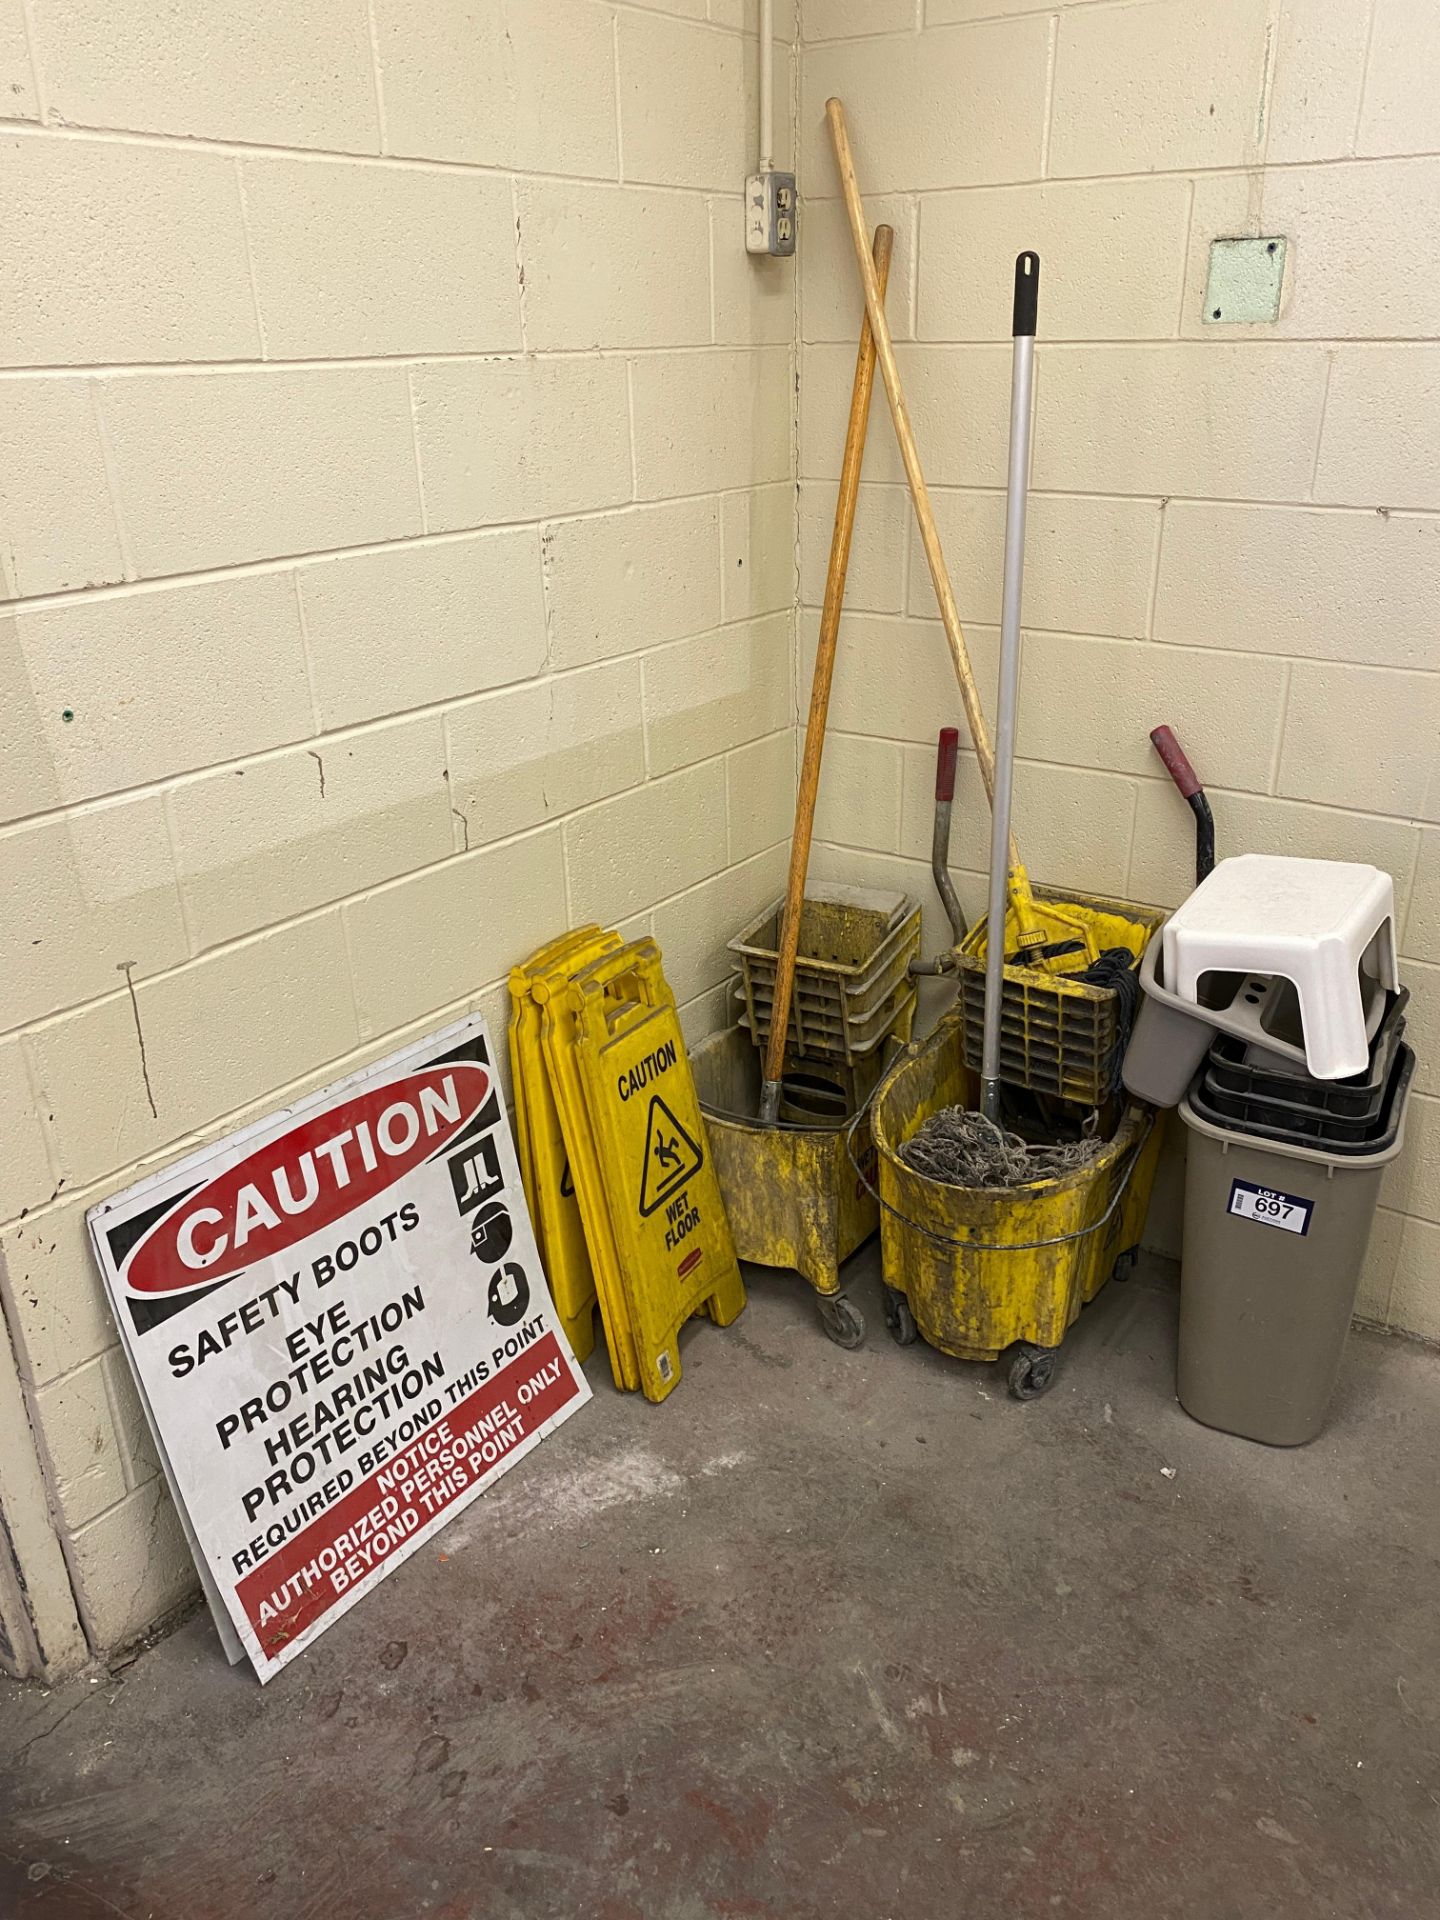 Lot of (2) Caution Signs (2) Mop Buckets, (3) Mops, (3) Wet Floor Signs, and Asst. Waste Bins, etc.